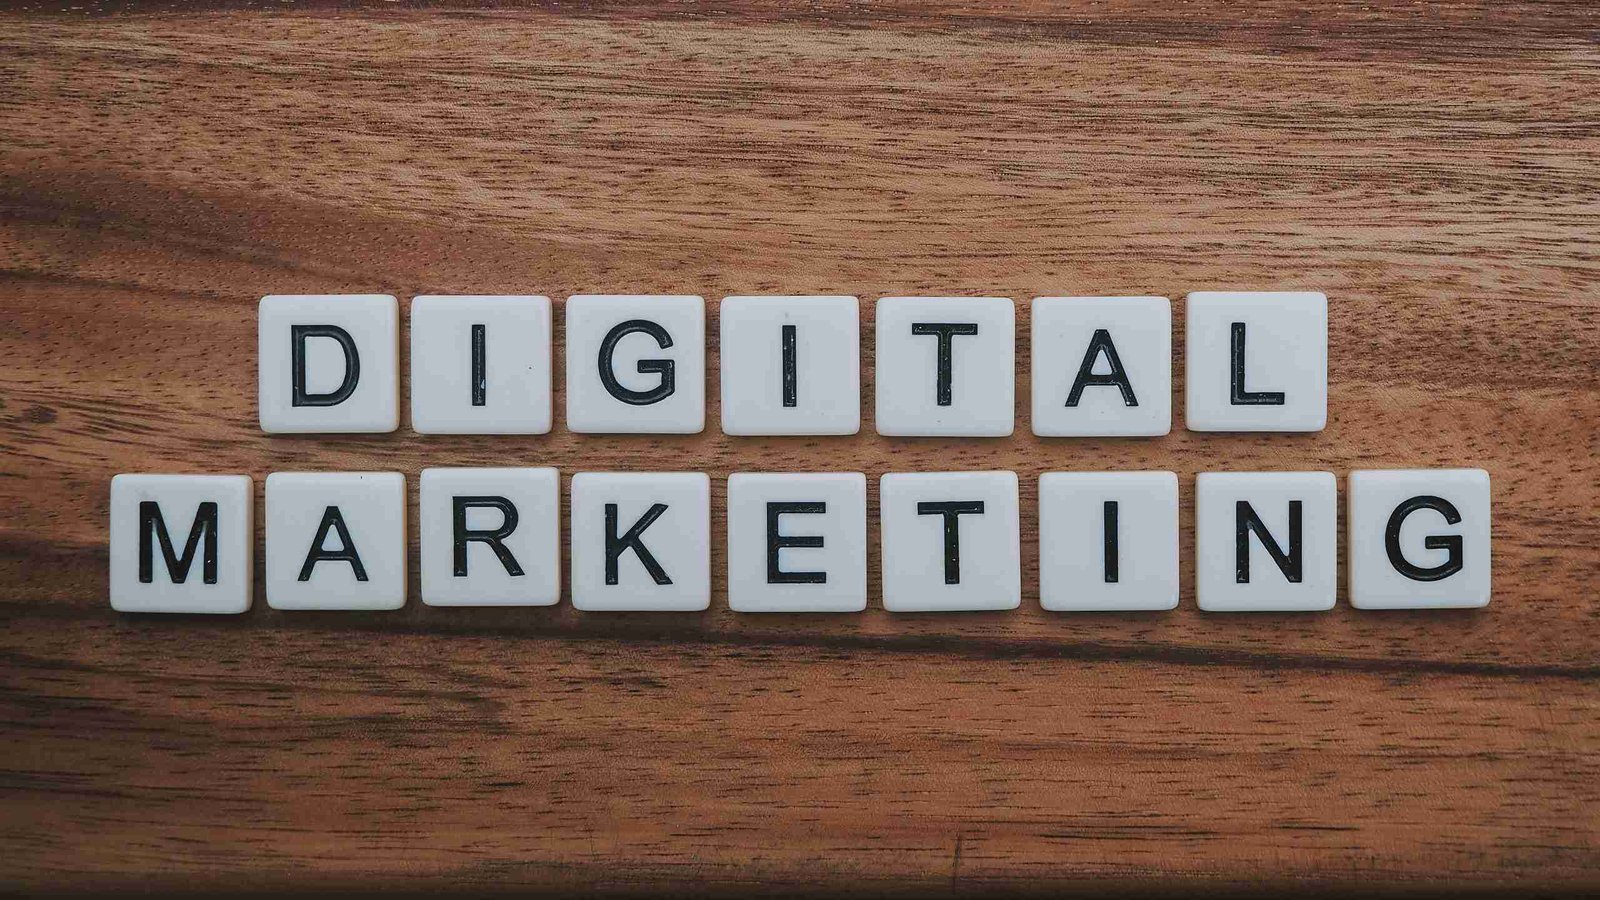 How-Digital-Marketing-Can-Help-Grow-Your-Business